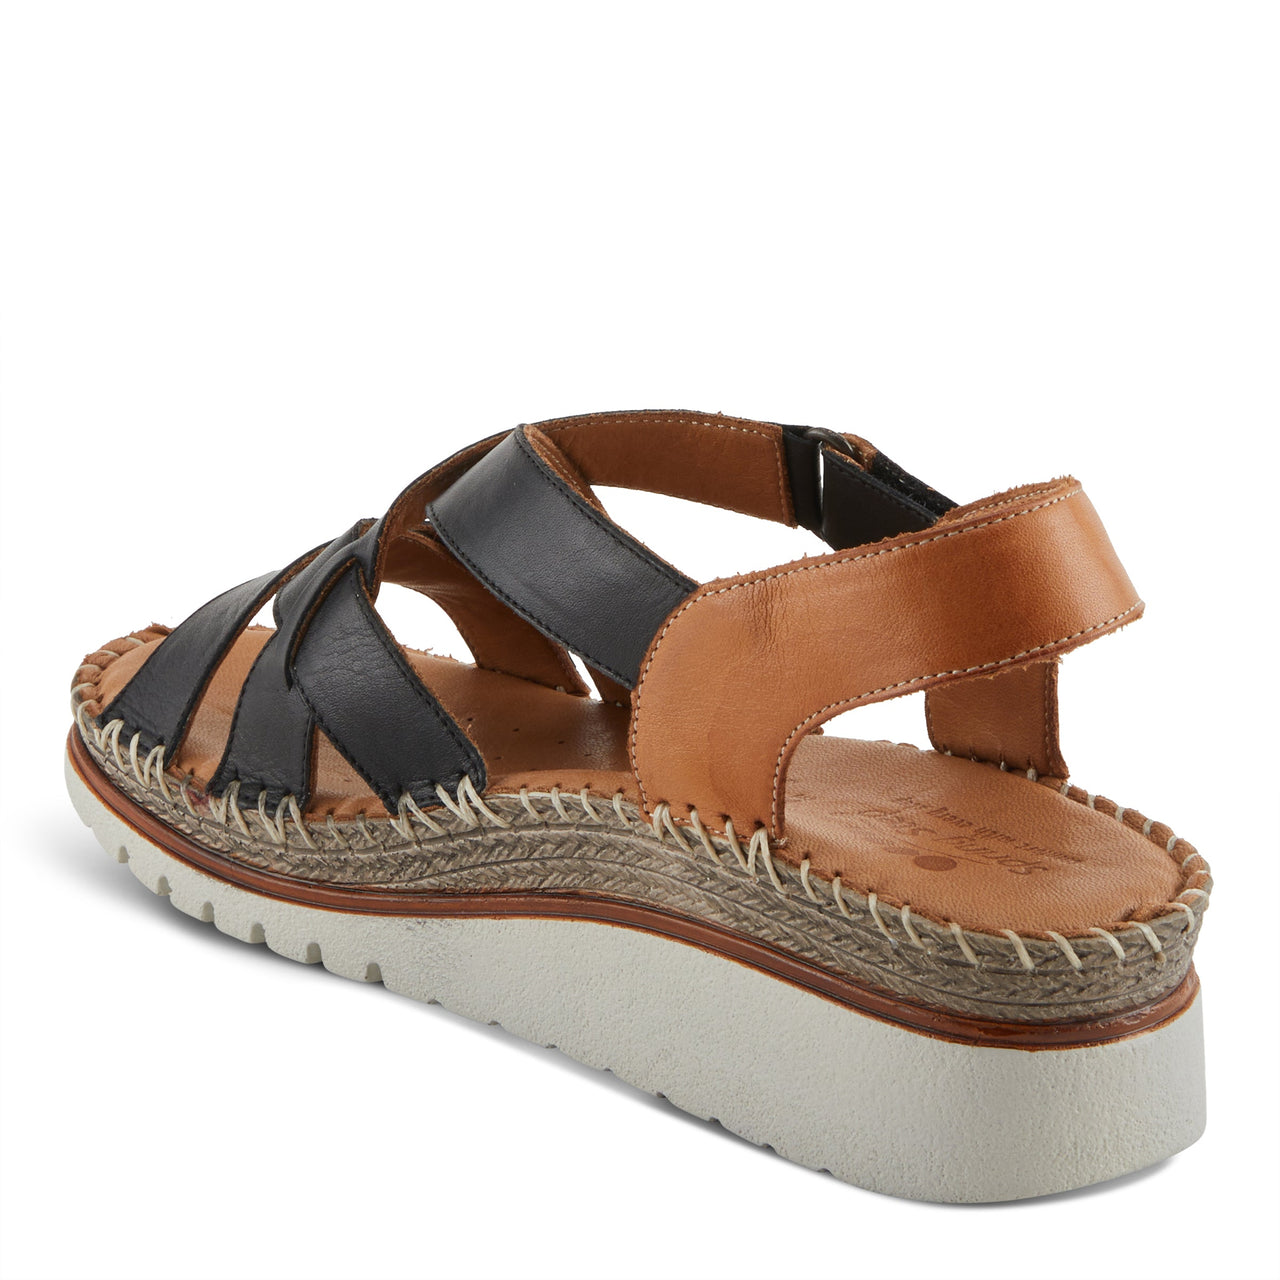 Versatile Spring Step Migula Sandals with metallic accents and adjustable hook-and-loop closure